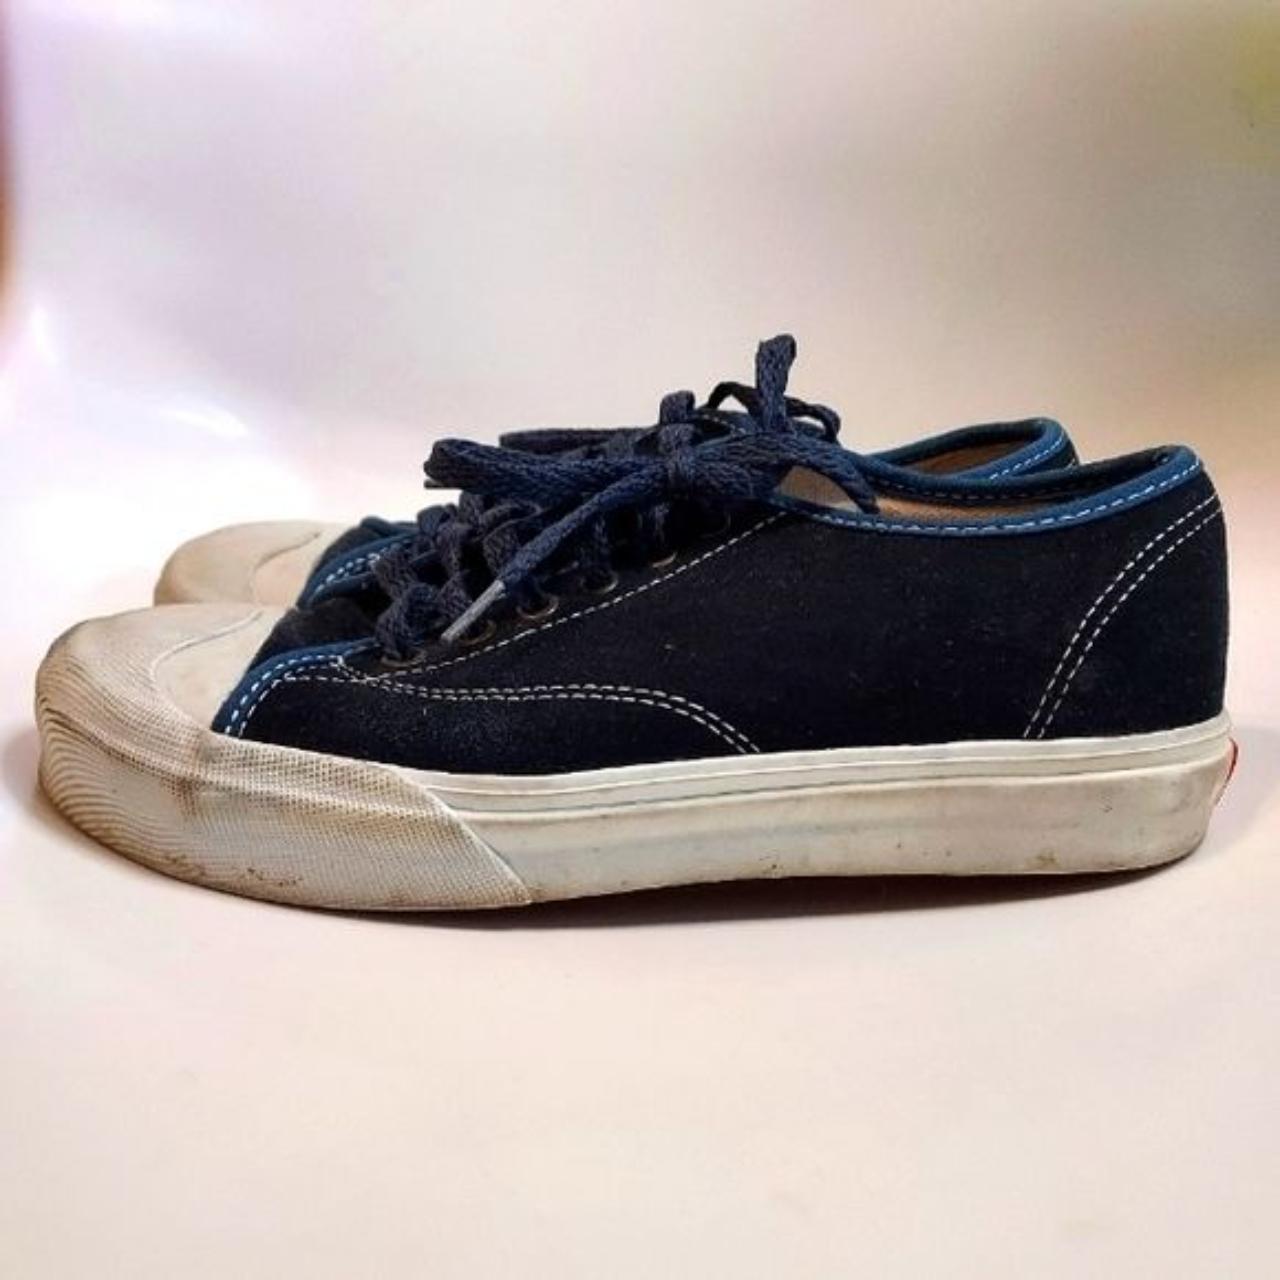 Circa early 2000s--this shoe was not in production... - Depop